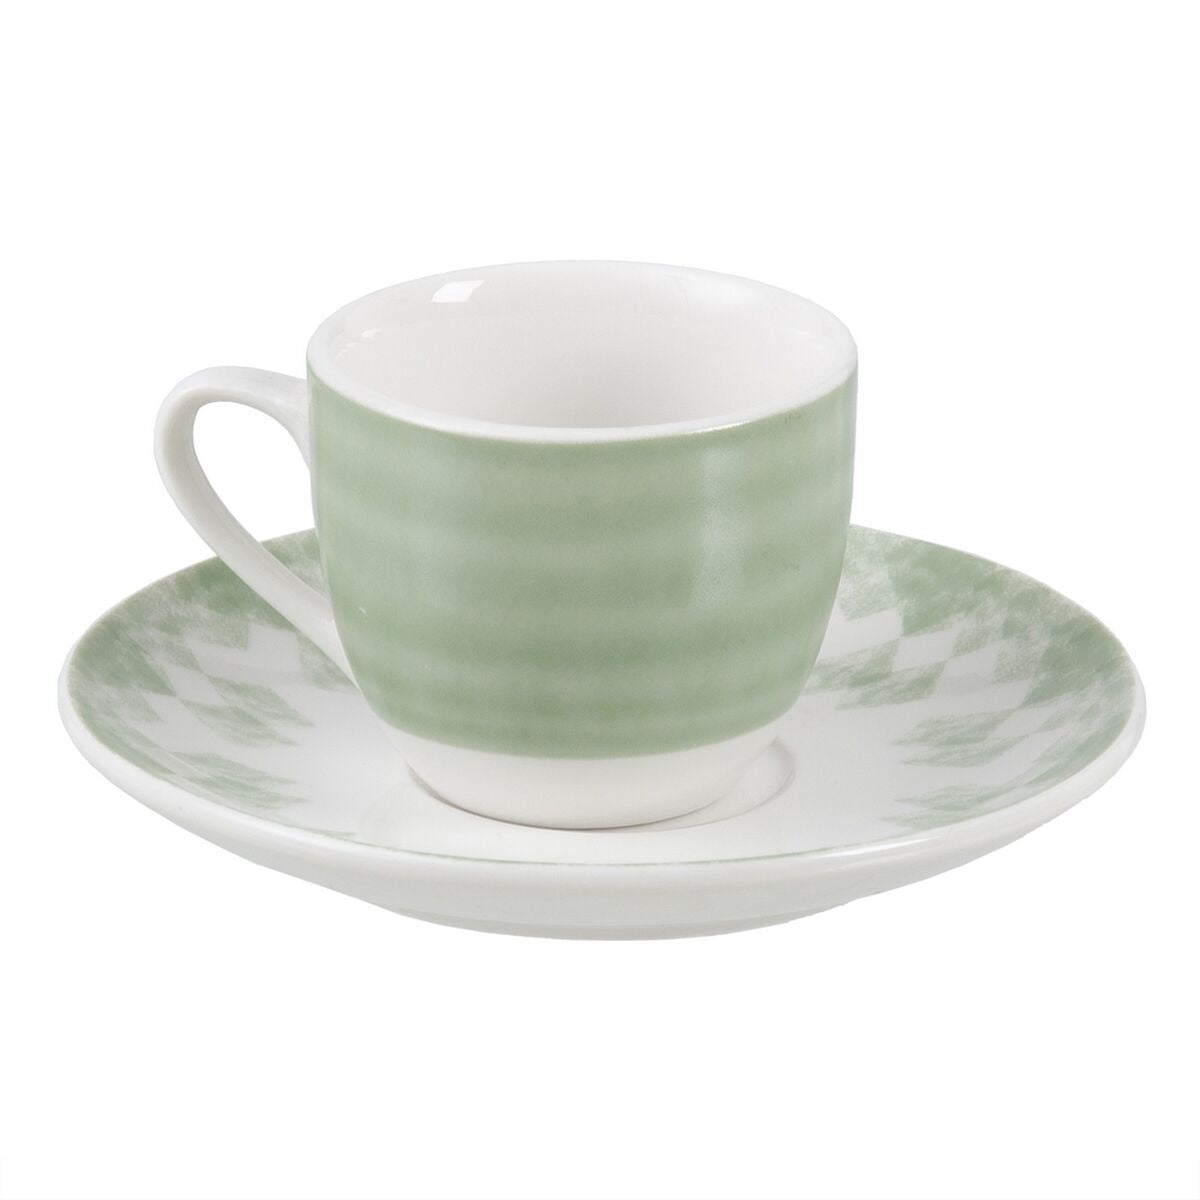 Multicolour Set of Cups with Saucers in Porcelain (6 Pieces)